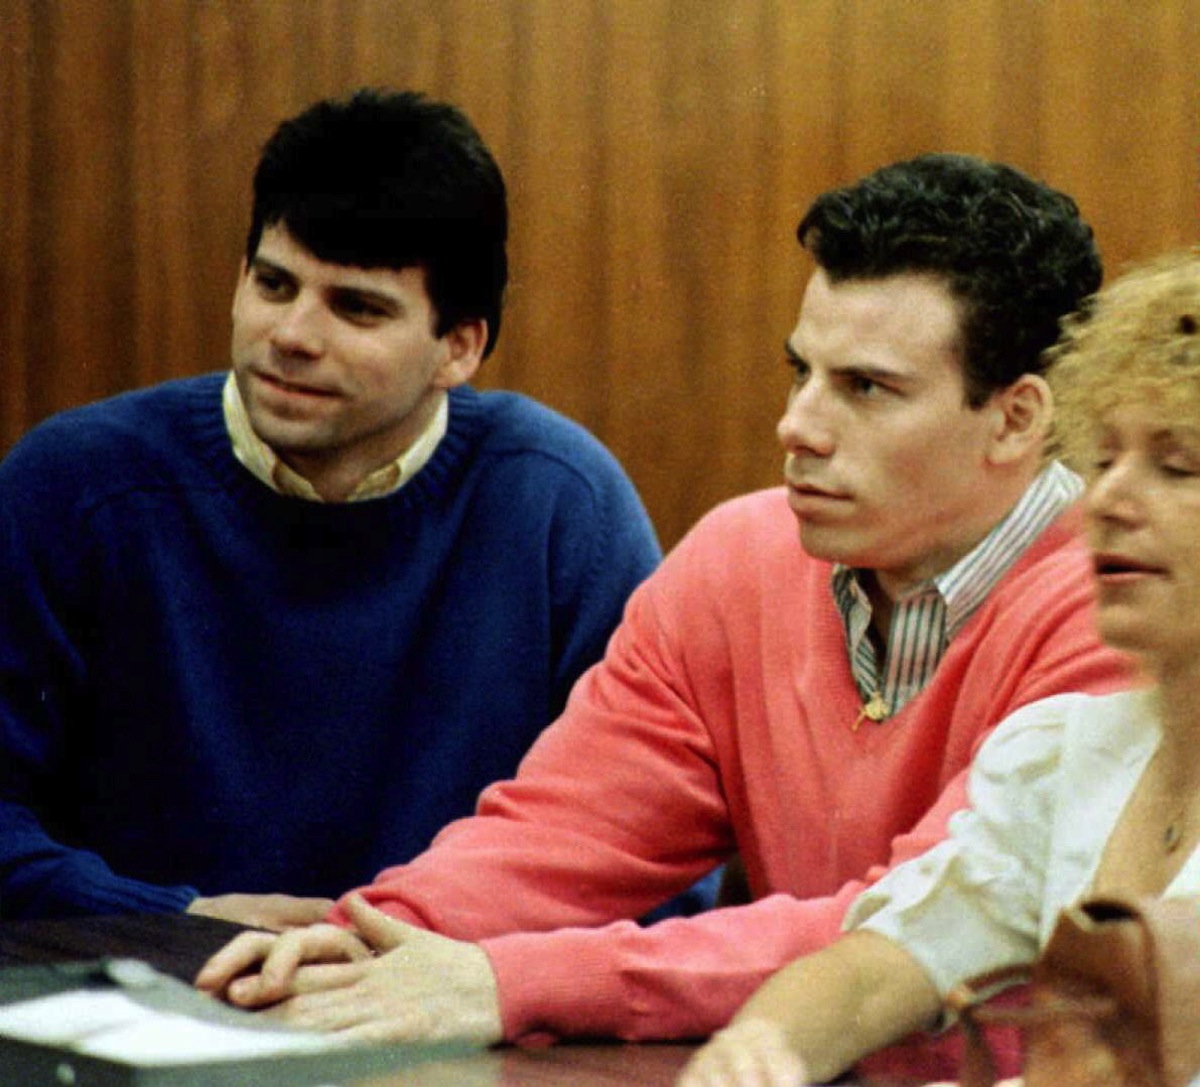 Double murder defendants Erik (R) and Lyle Menendez (L) during a court appearance in Los Angeles, Calif., in 1992 (Mike Nelson—AFP/Getty Images)